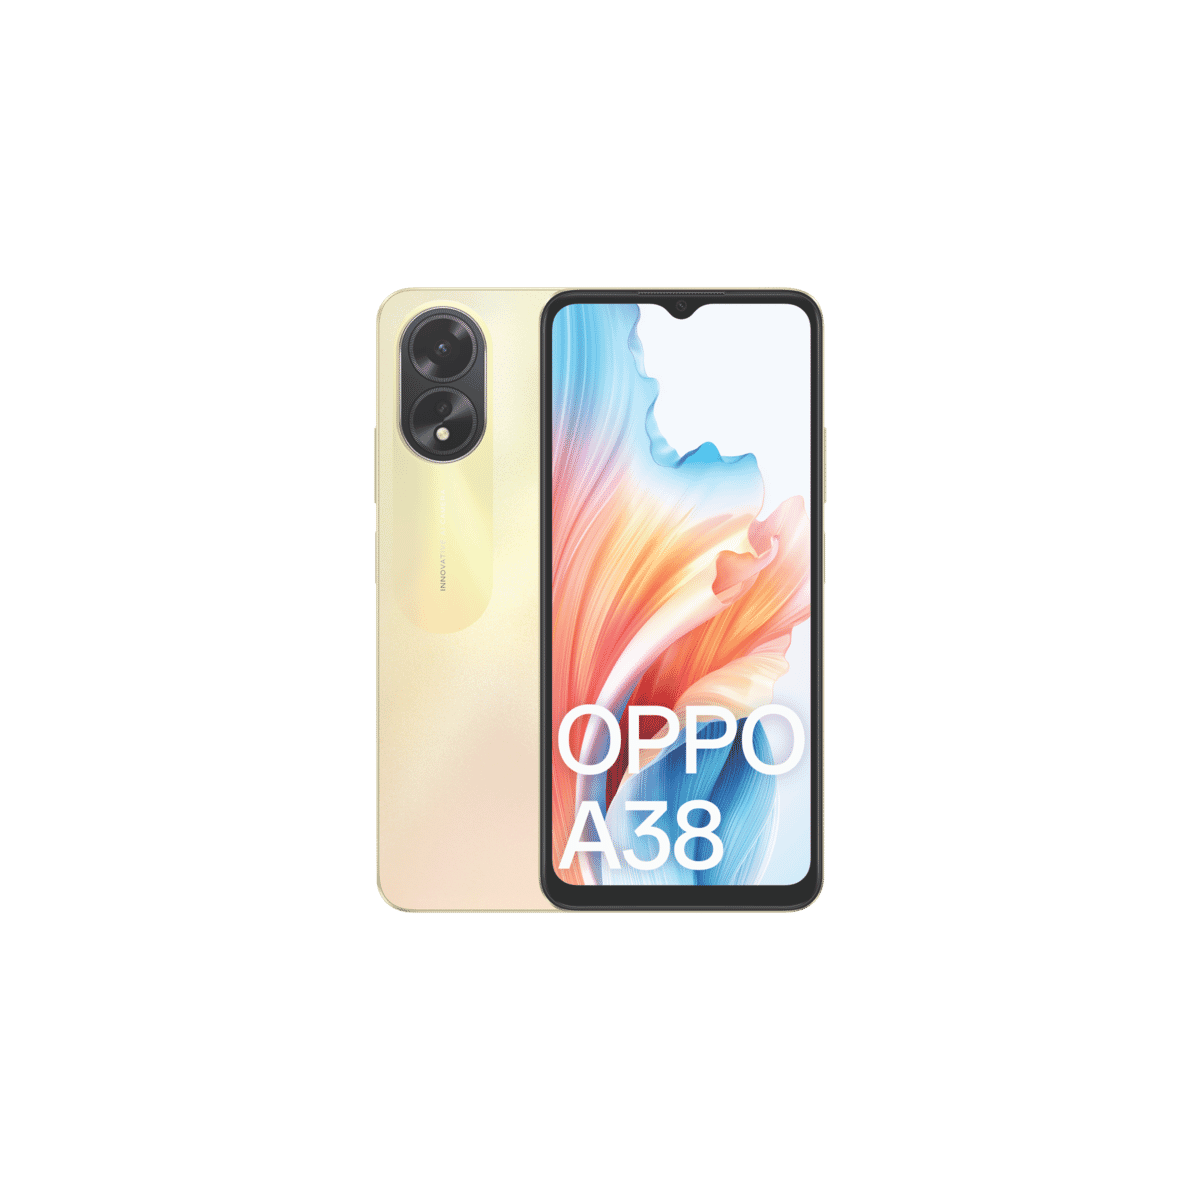 Oppo A38: Price, specs and best deals